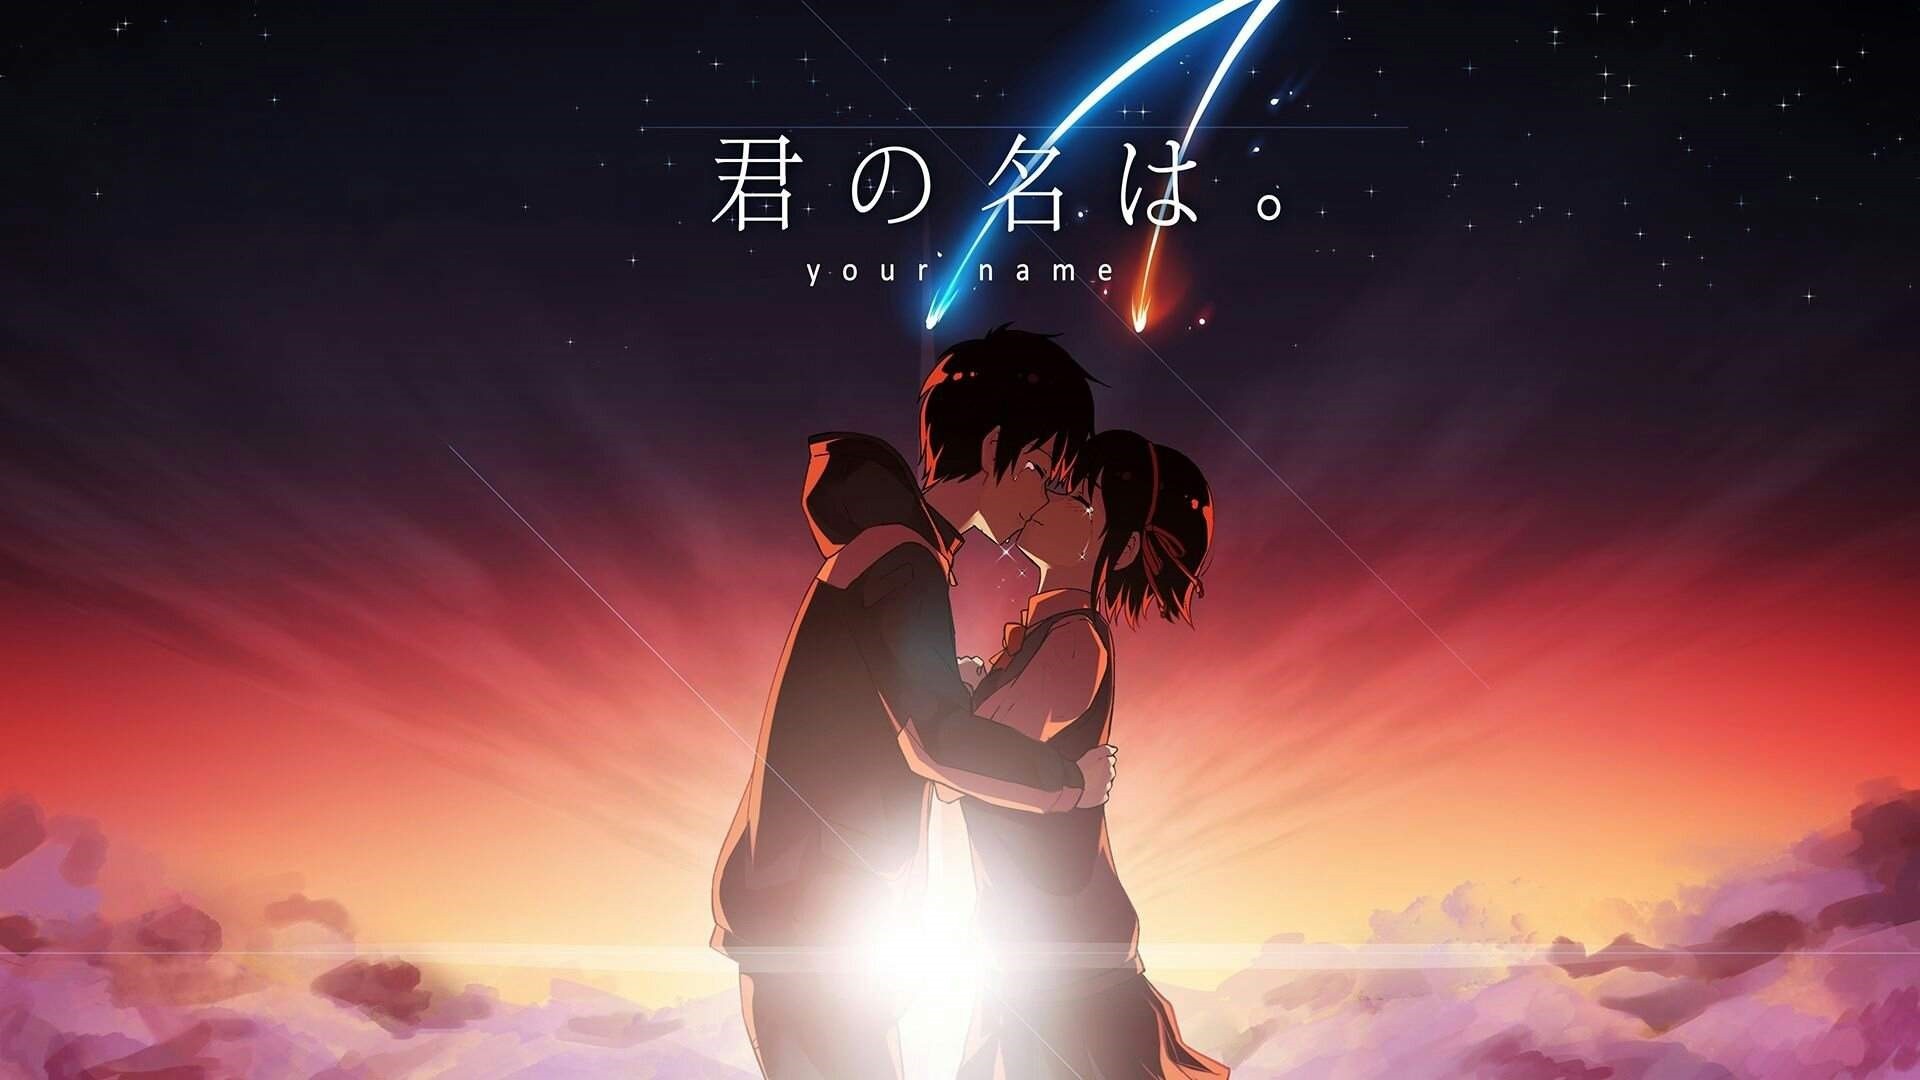 Your Name hd wallpaper download